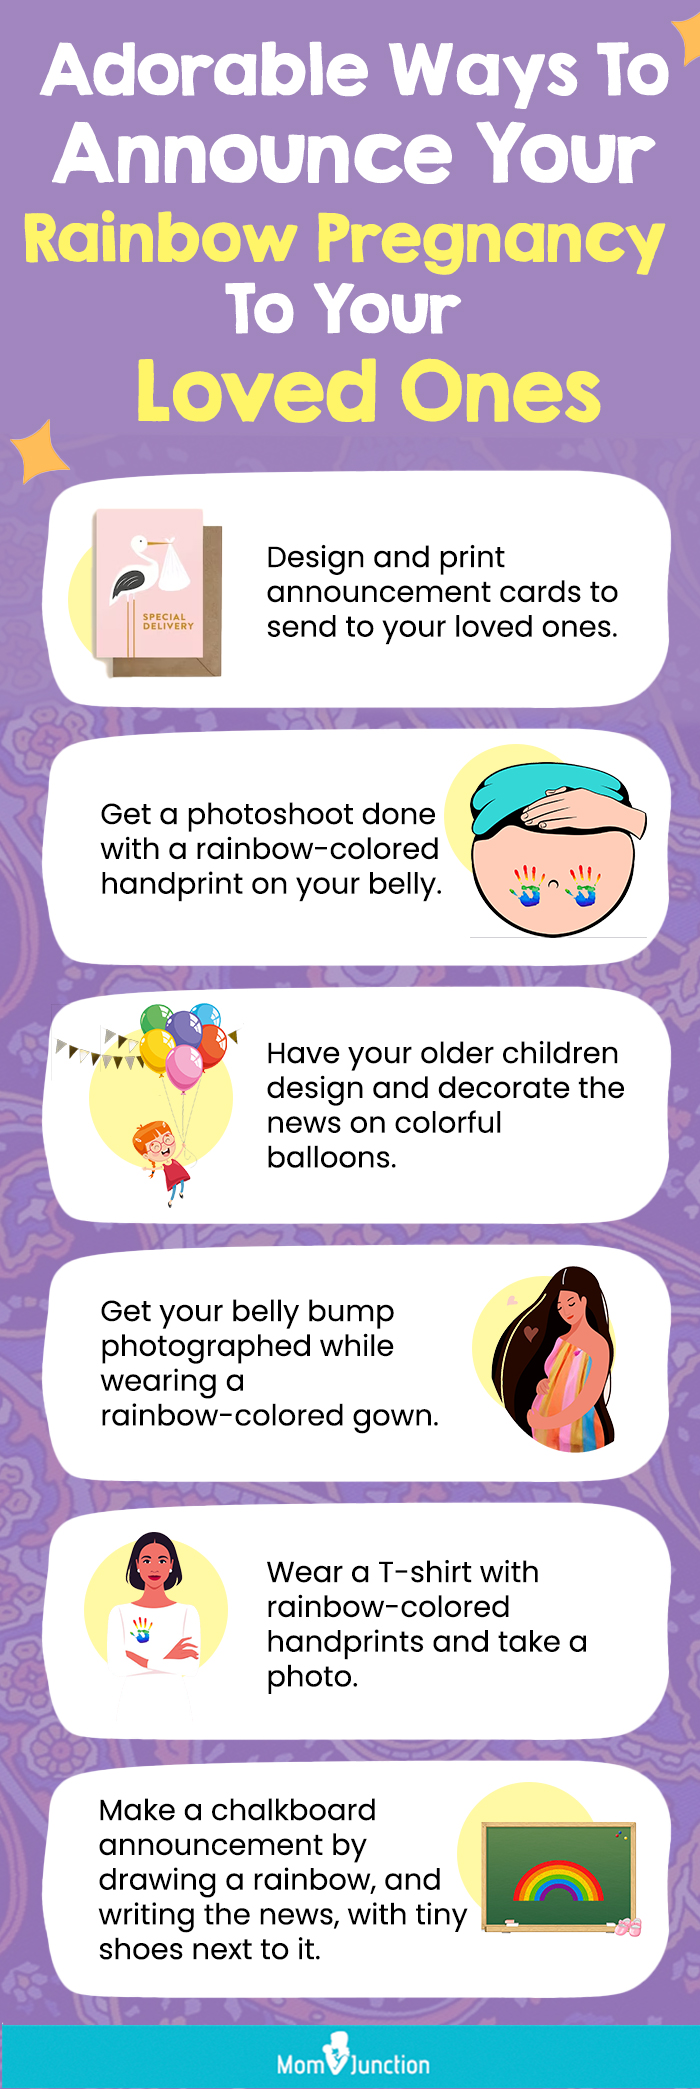 adorable ways to announce your rainbow pregnancy to your loved ones (infographic)